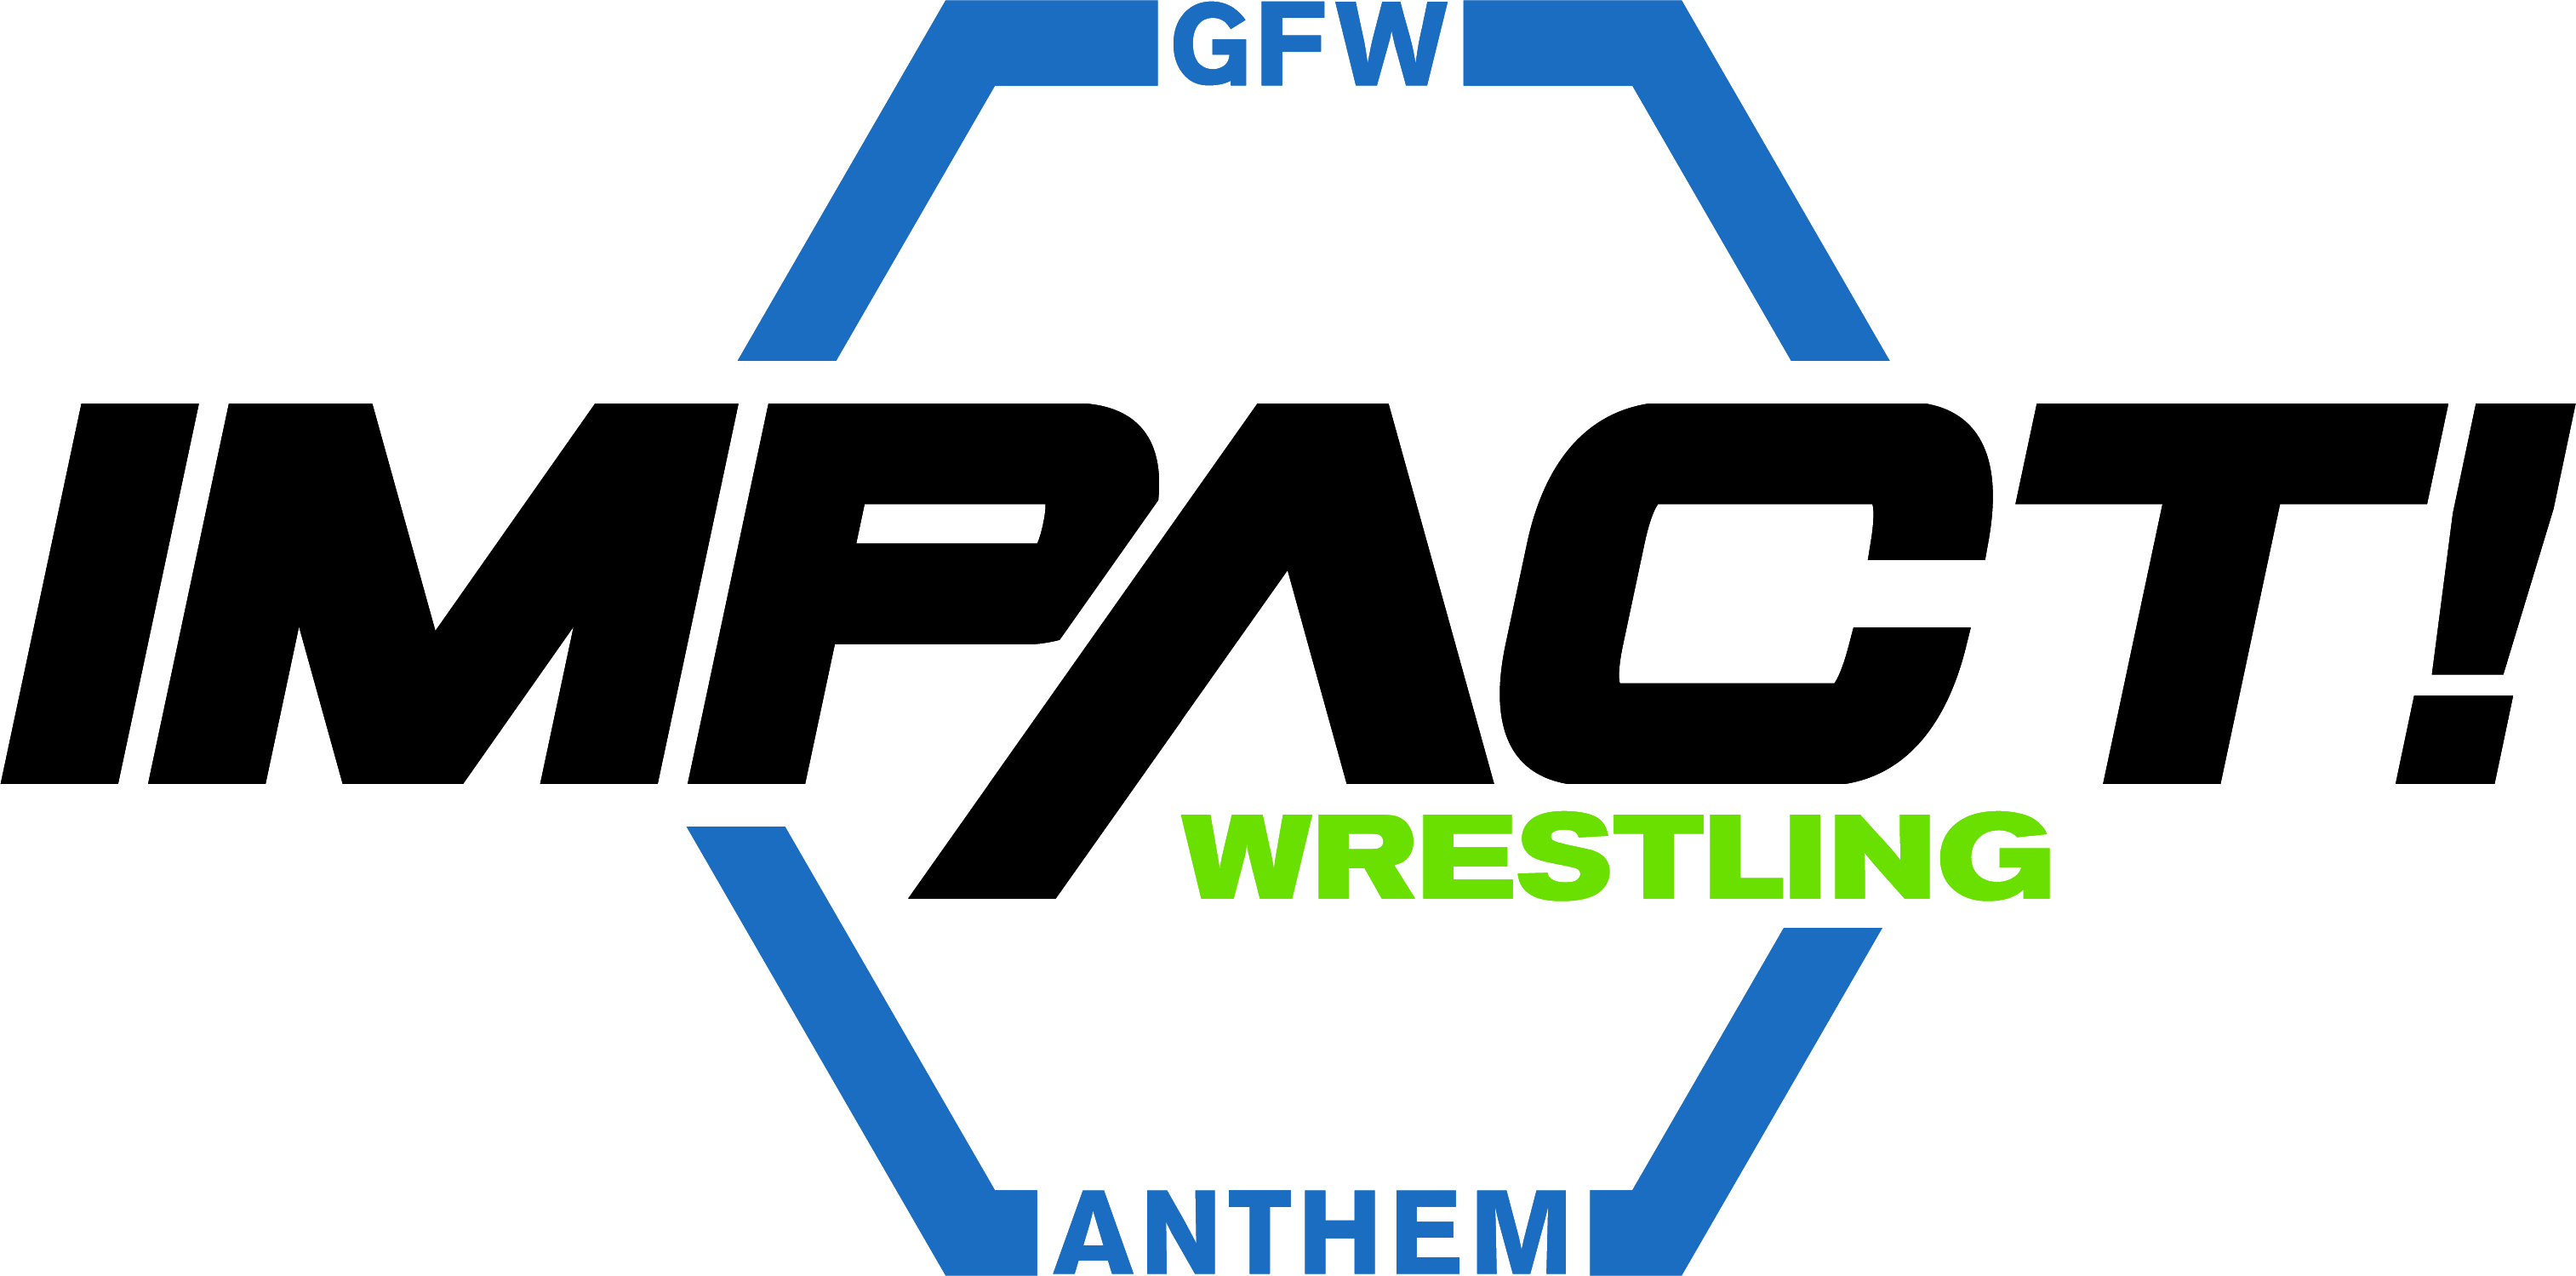 In July 2017 All References To Impact Wrestling, Except - Impact Wrestling Custom Logo (3027x1499)